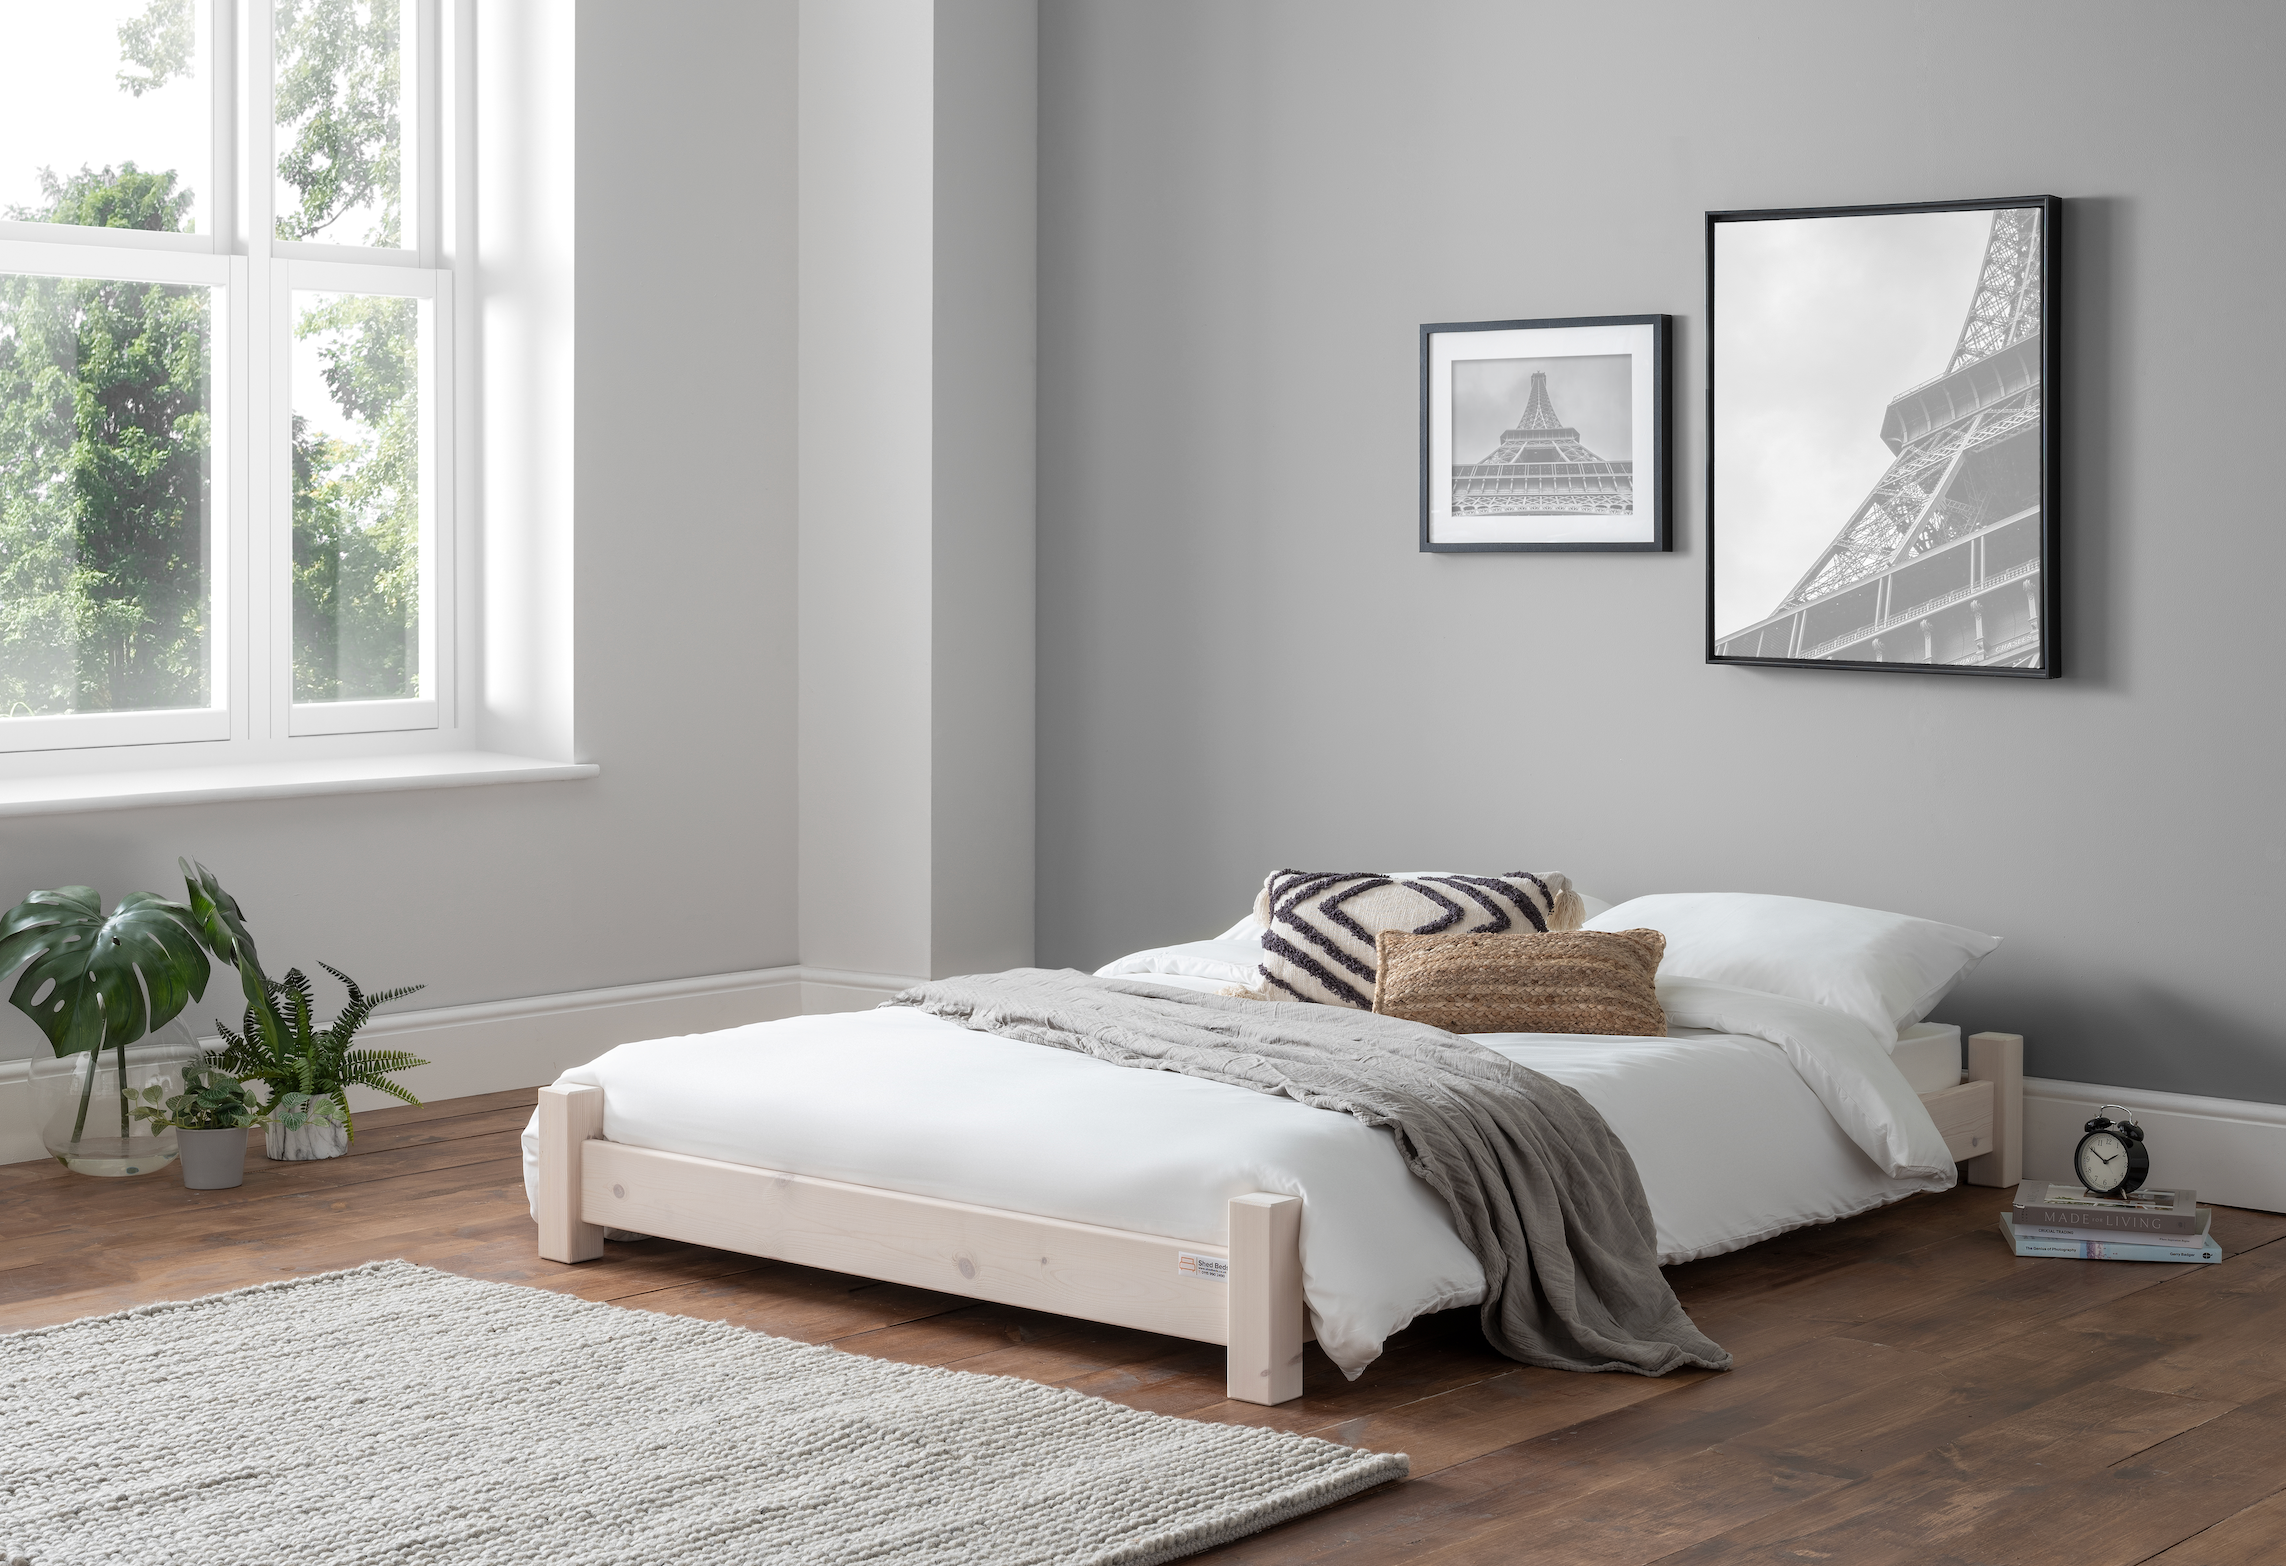 Low bed frame in "white" finish in room setting